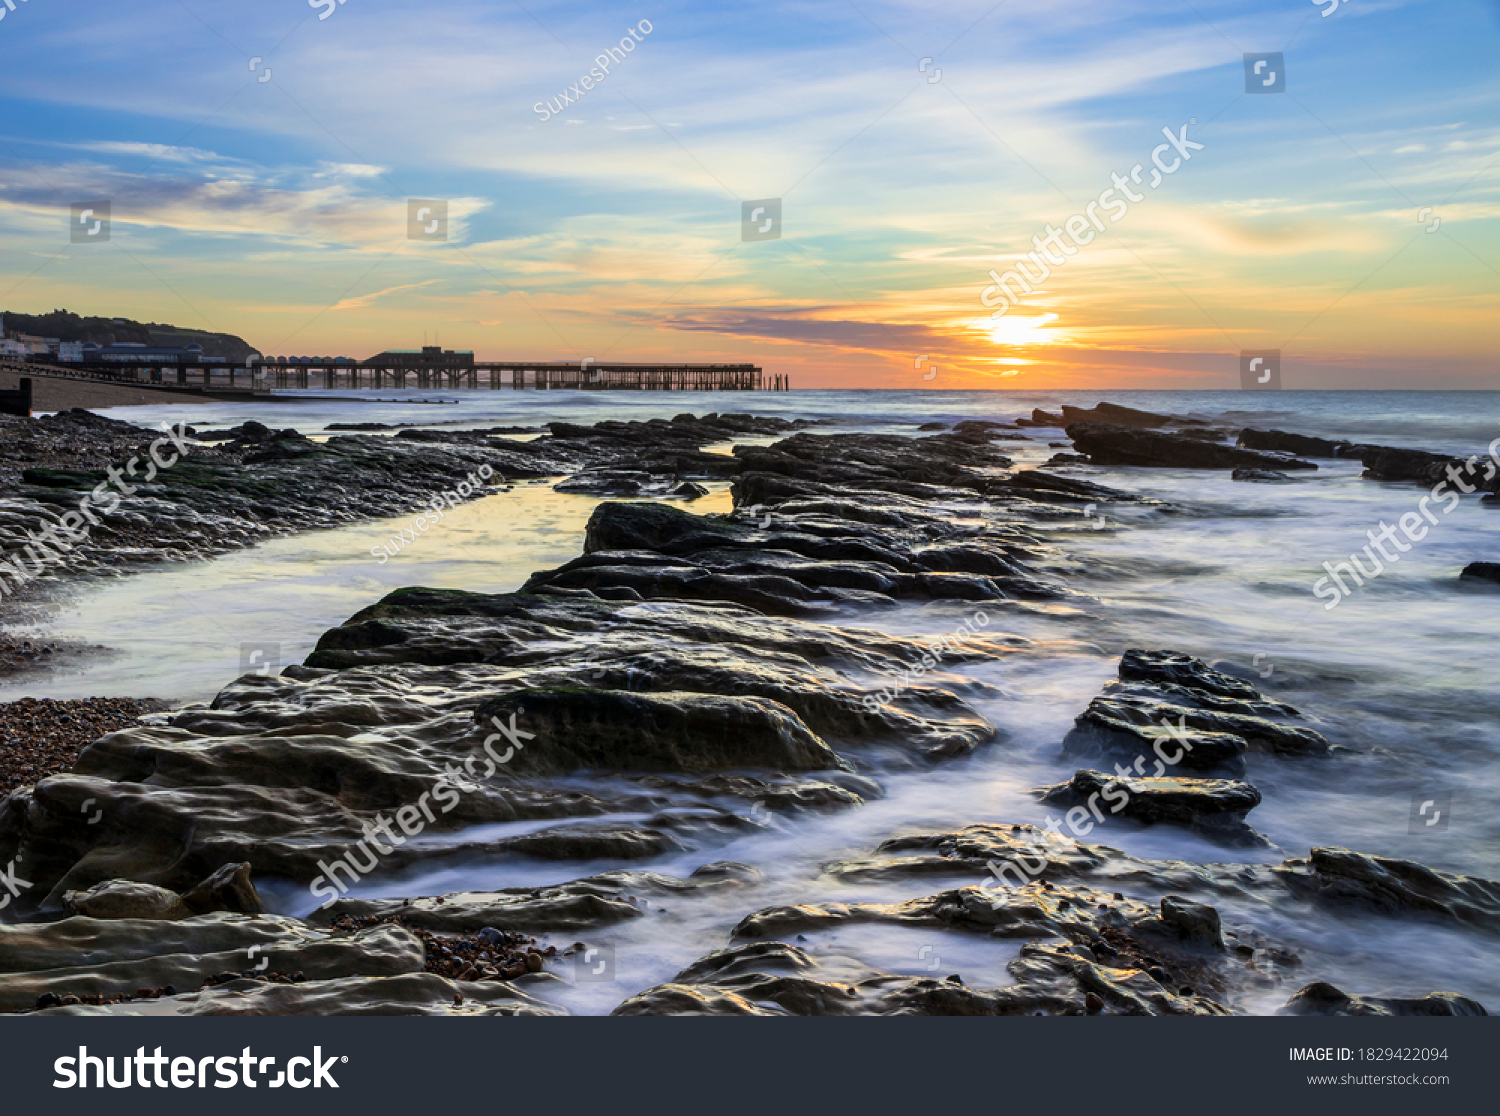 The sun rising and the tide receding revealing the rocks on St Leonards beach with Hastings pier on the horizon, east Sussex south east England #1829422094